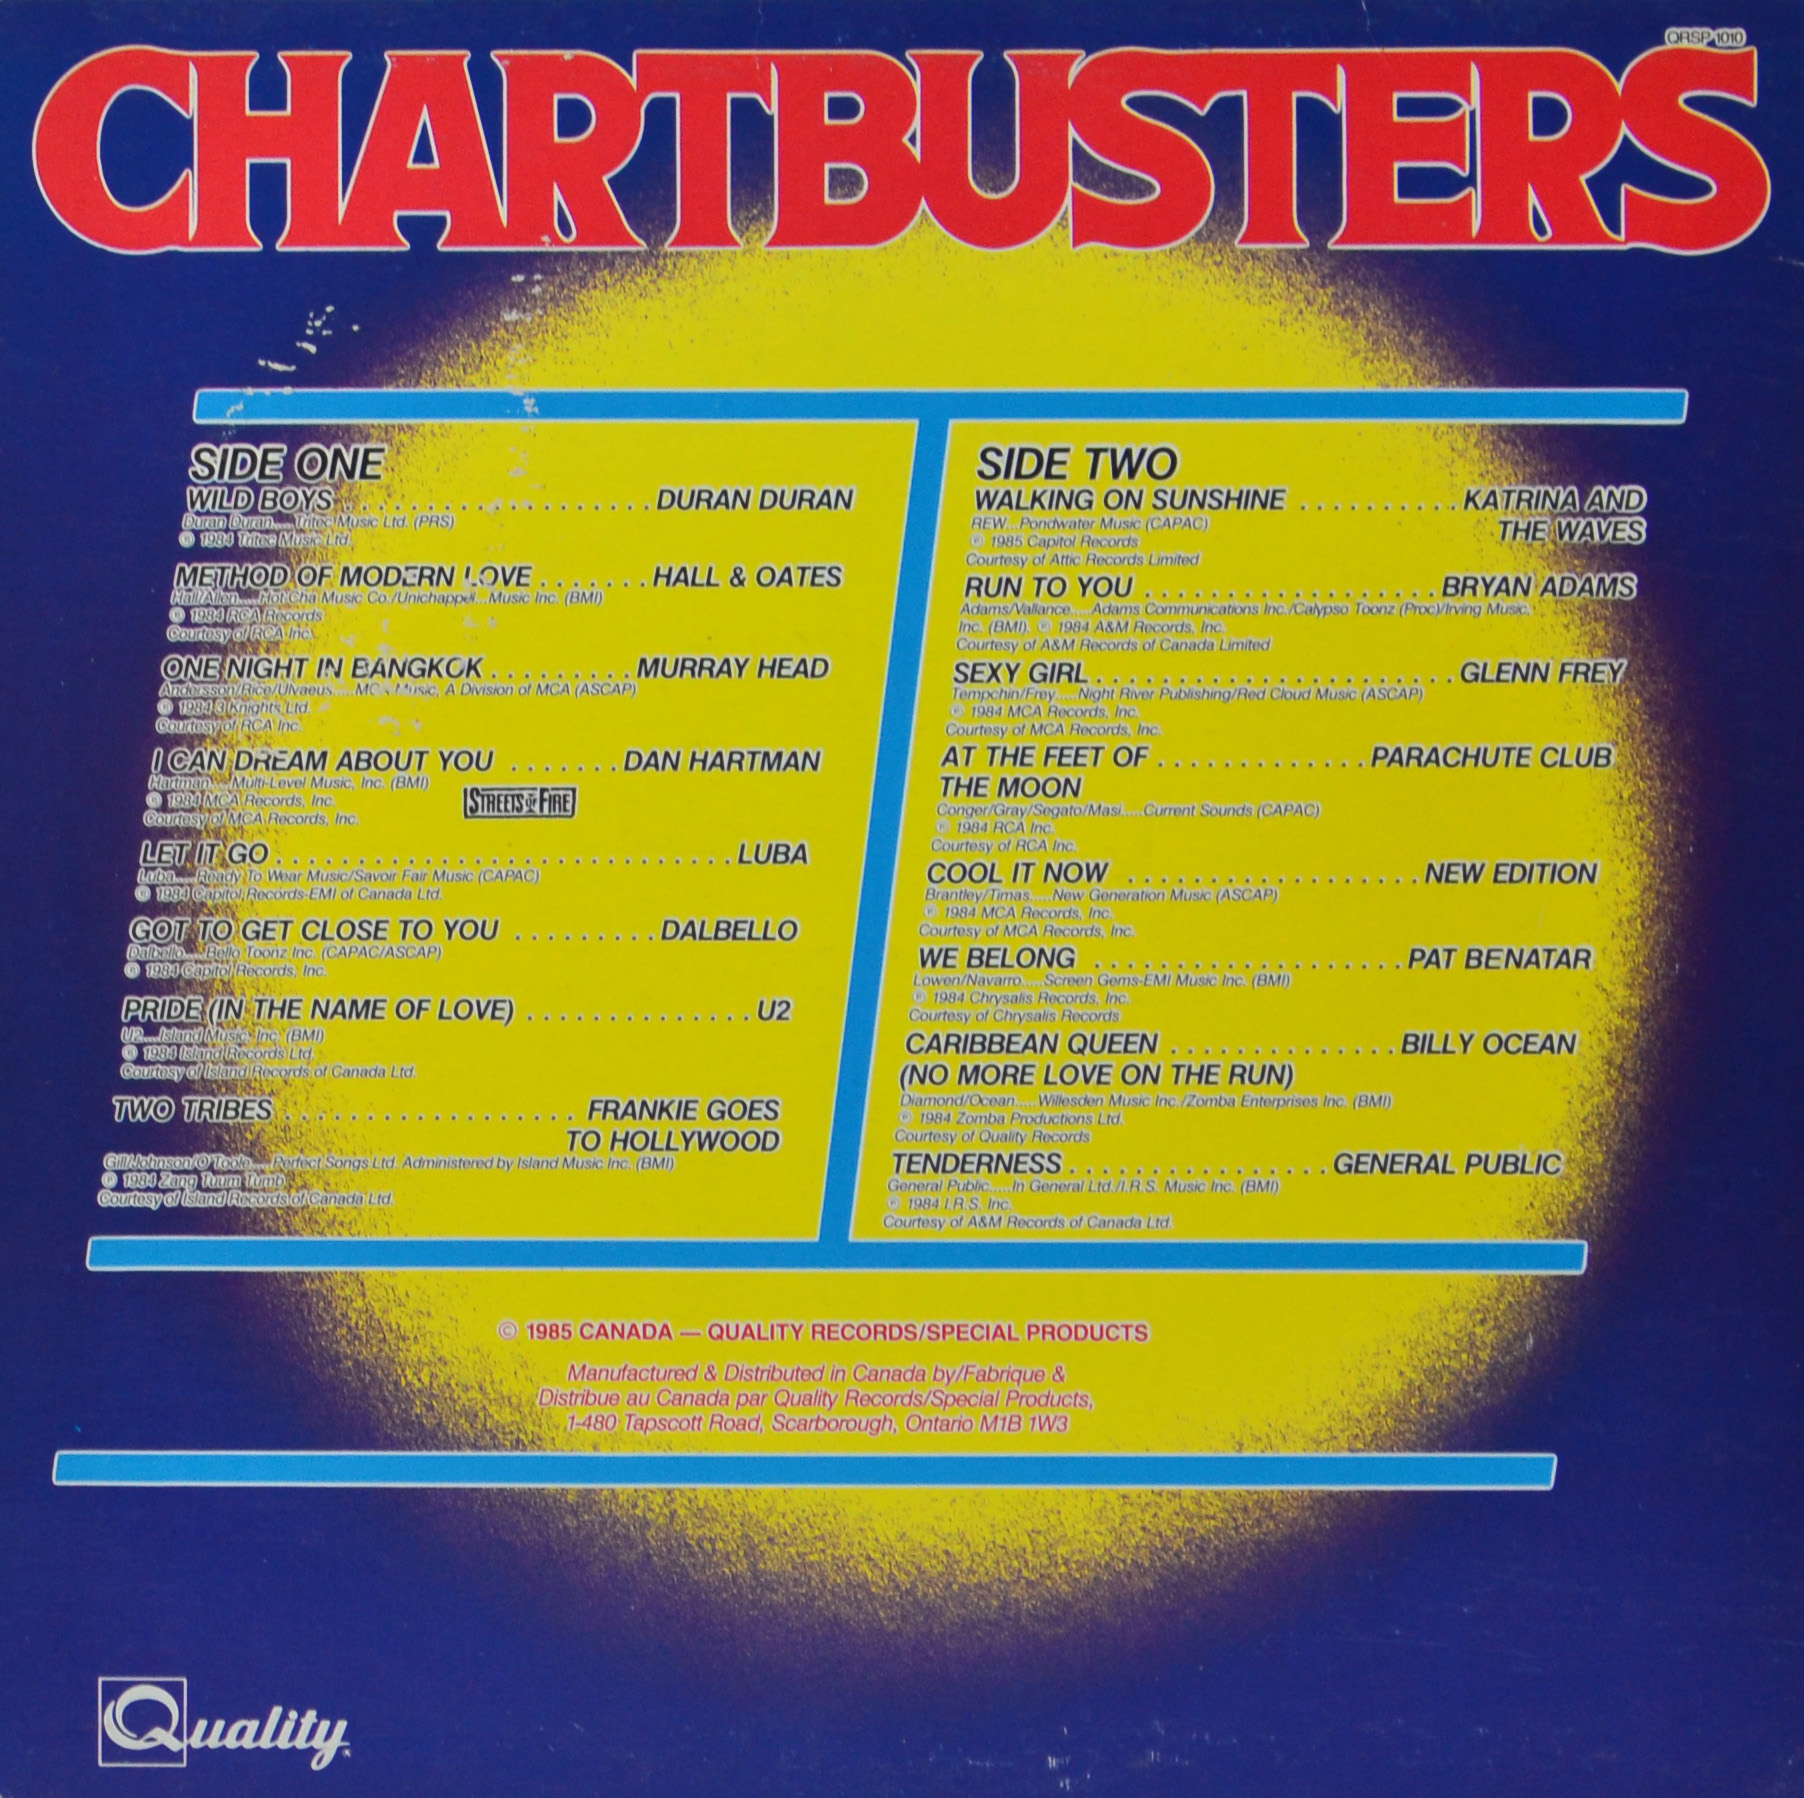 Chartbusters